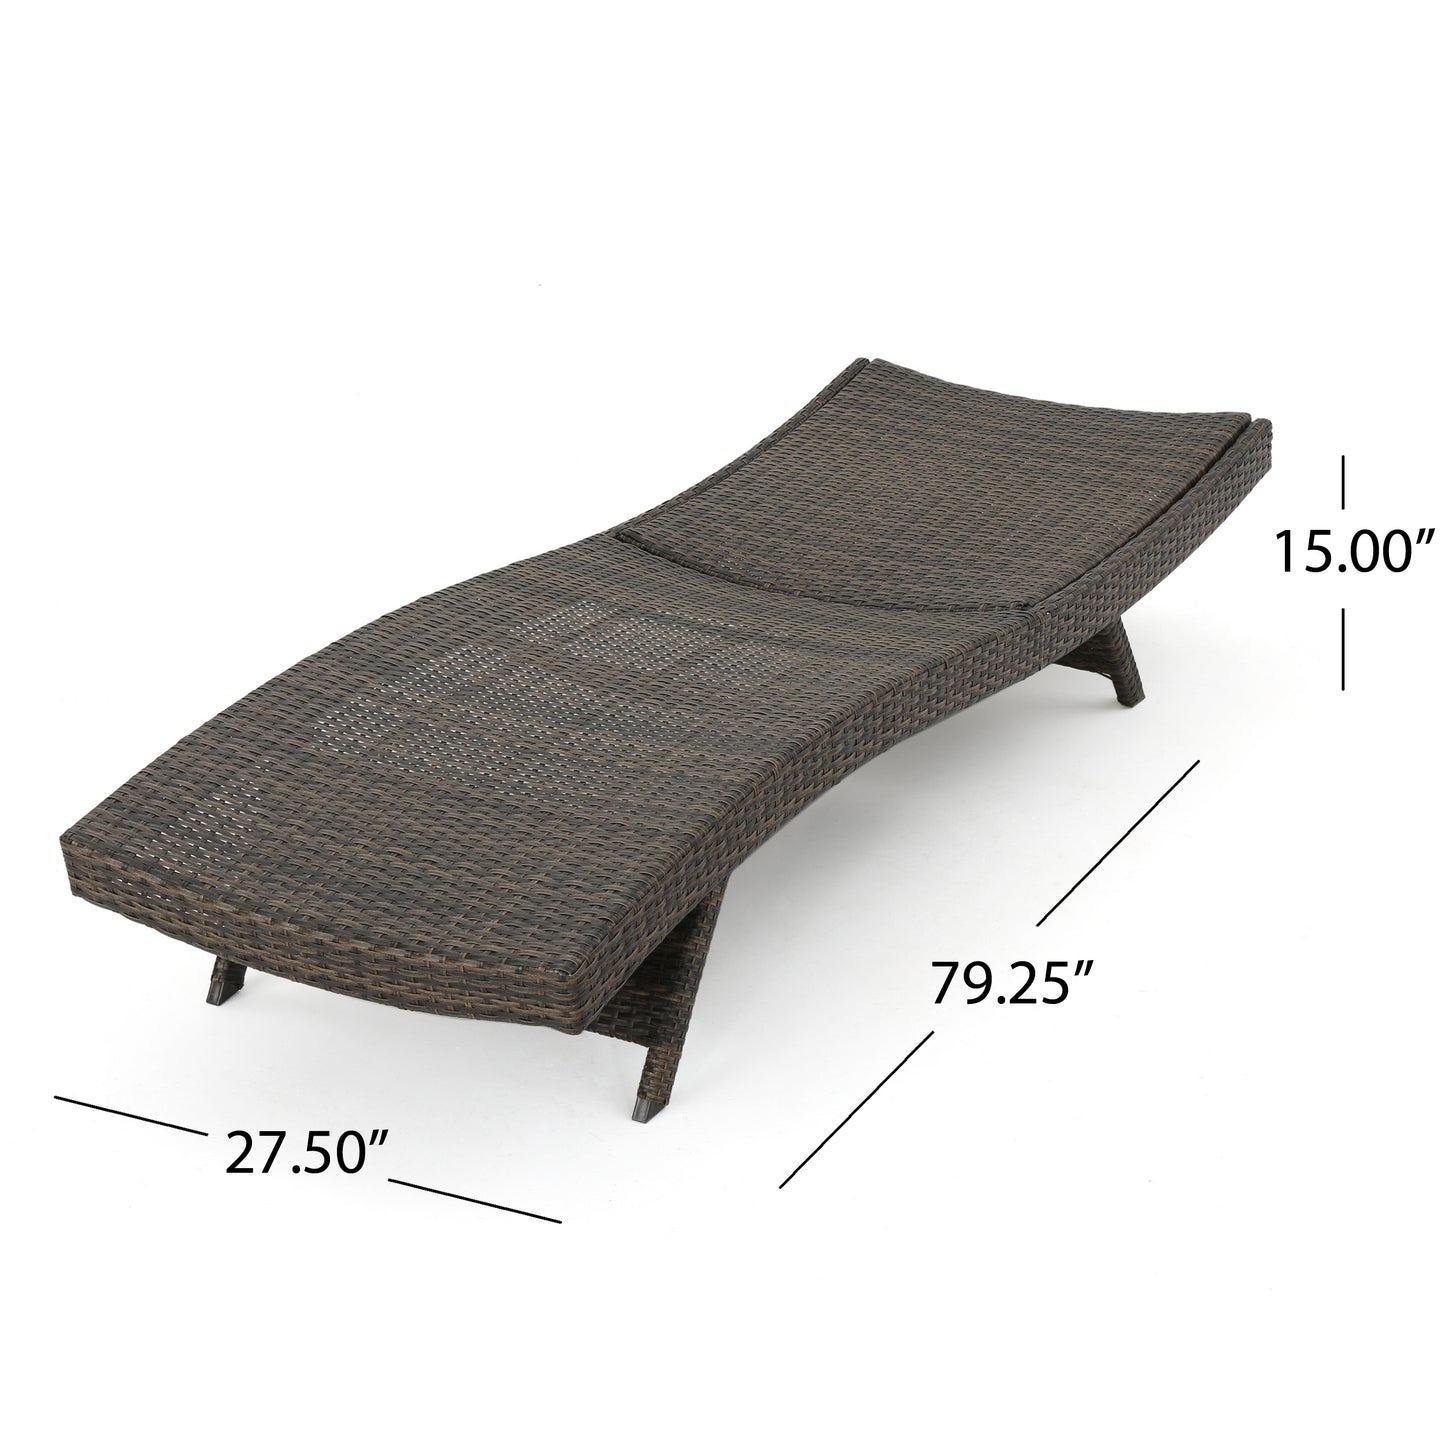 Thelma Outdoor Wicker Chaise Lounge w/ Aluminum Frame & Table